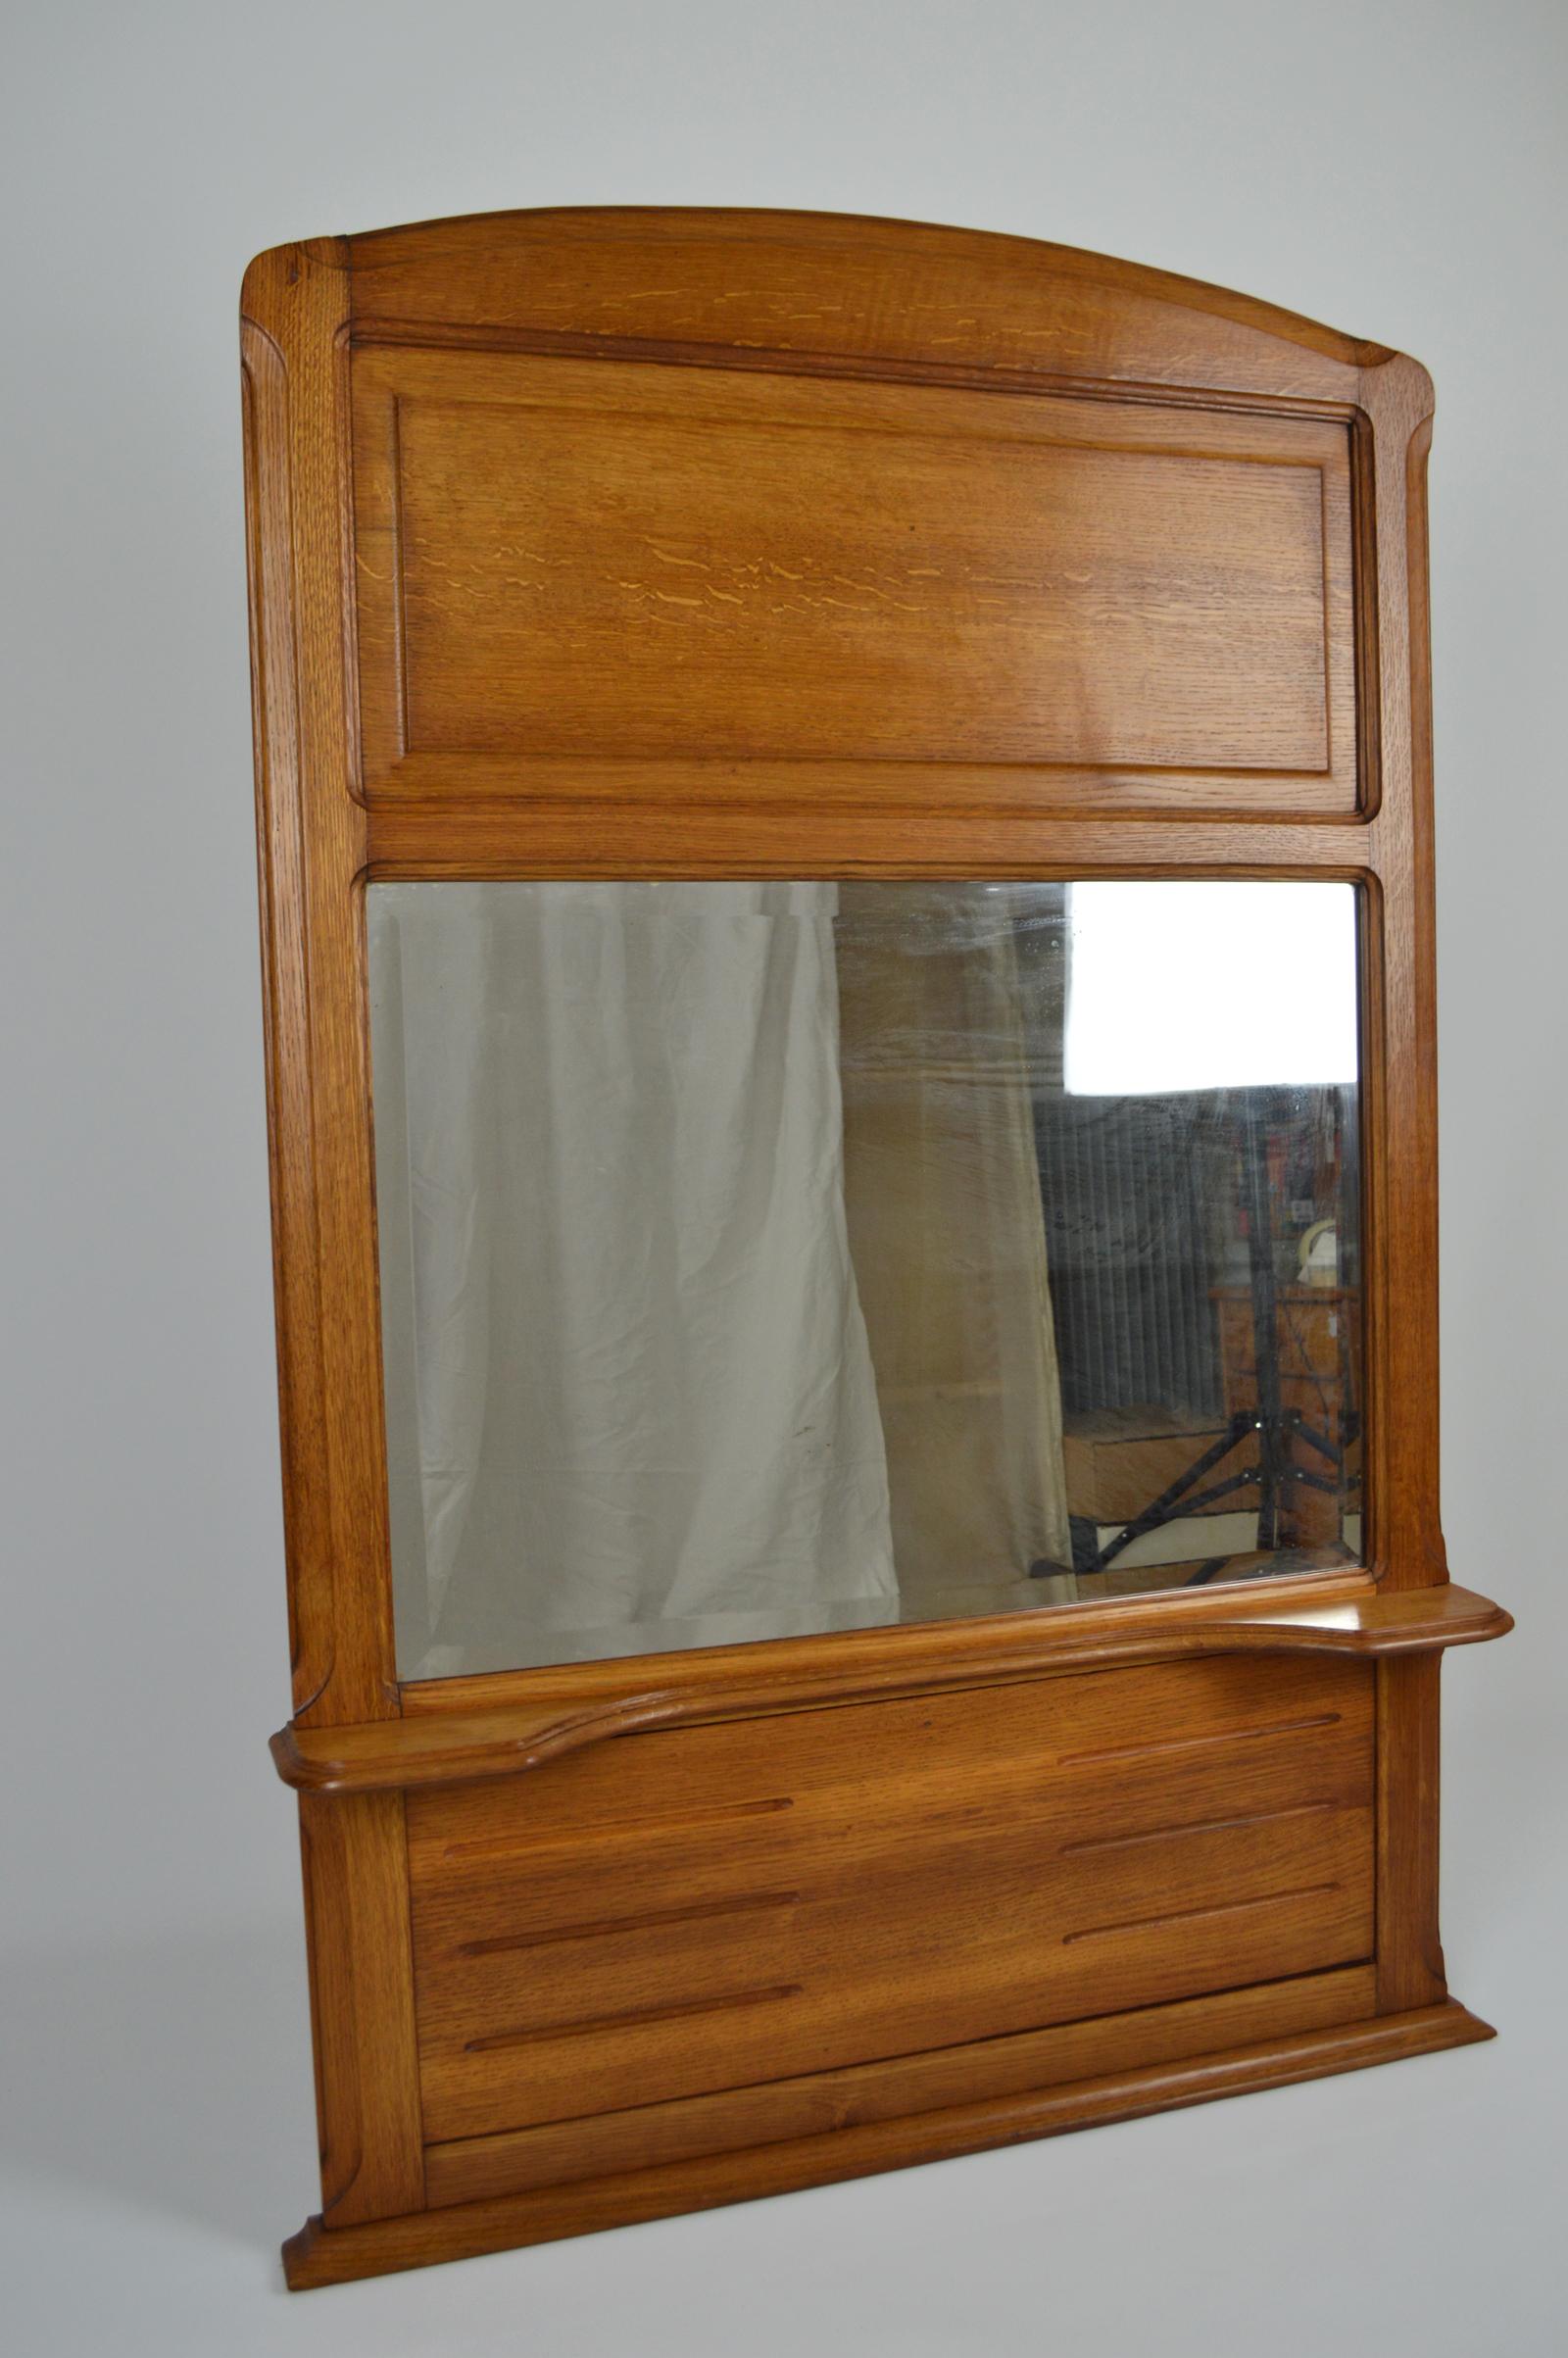 Beautiful fireplace or mantel or trumeau mirror in solid oak. 

Art Nouveau or Arts & Crafts, France, 1910-1920.

In the style of Mathieu Gallery’s productions.

Superb condition, professional restoration (stripping of the old finish,